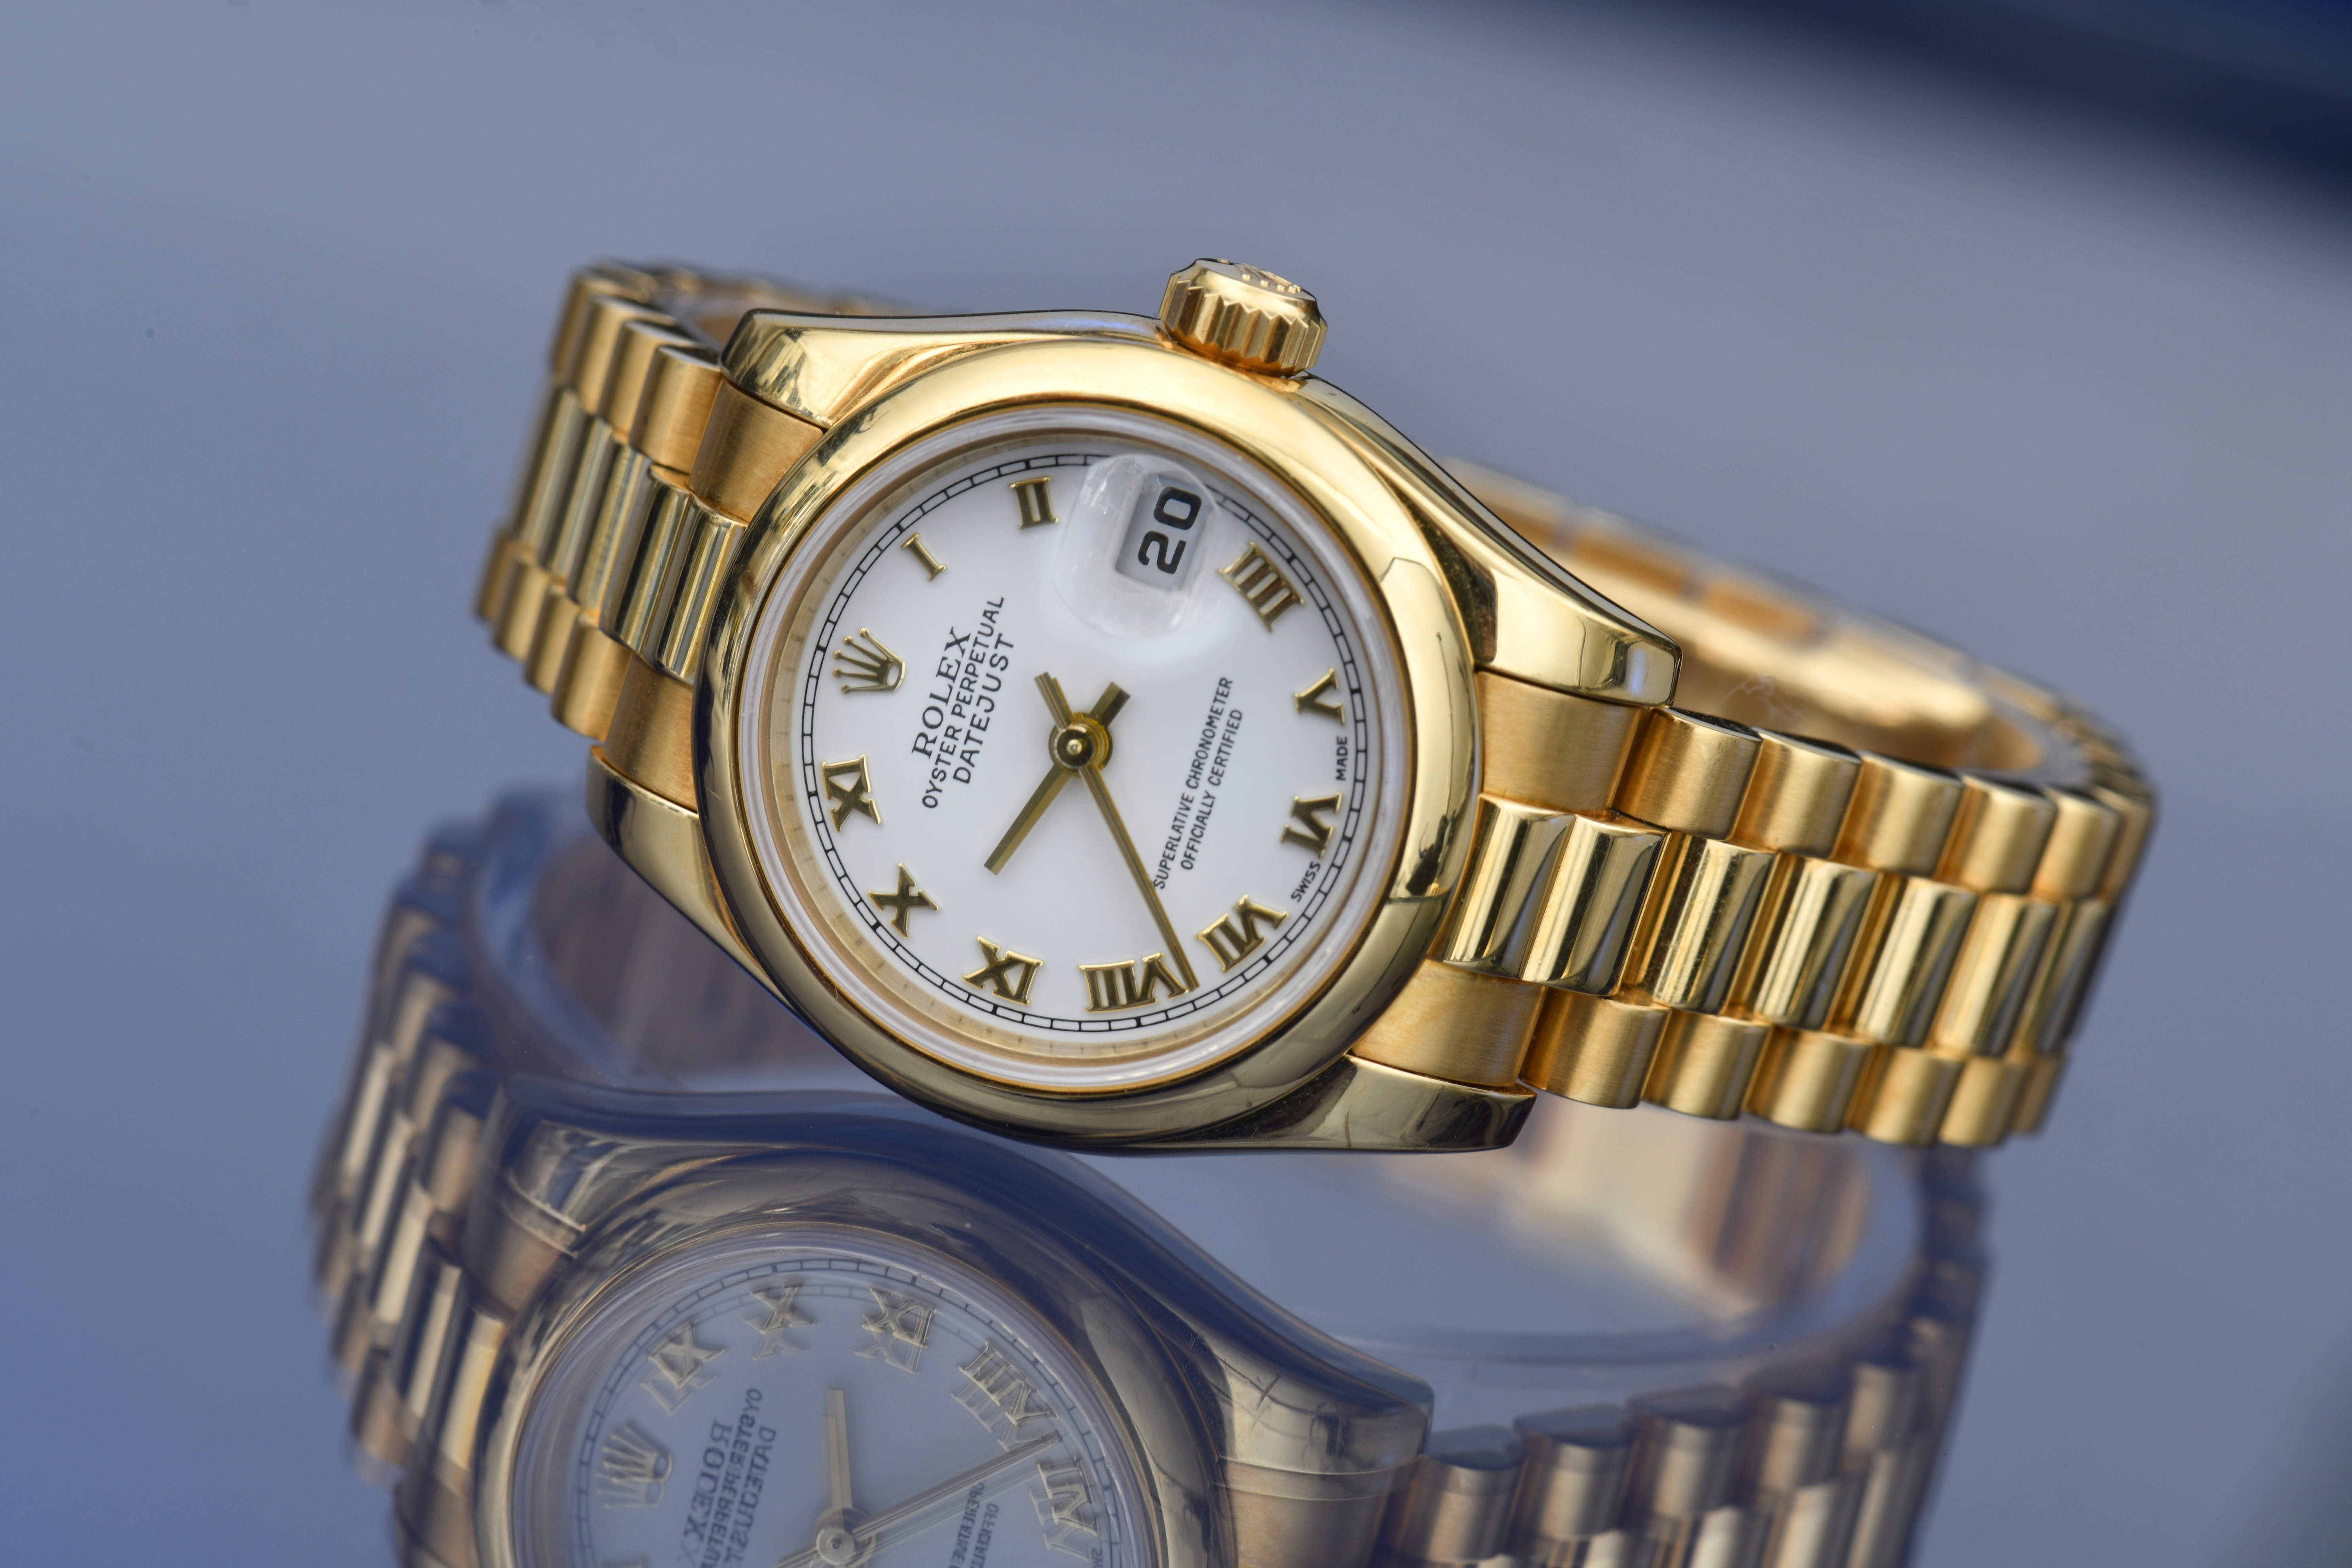 Rolex Oyster Perpetual Datejust 18ct gold ladies automatic wristwatch ref. 179168 with date - Image 4 of 8